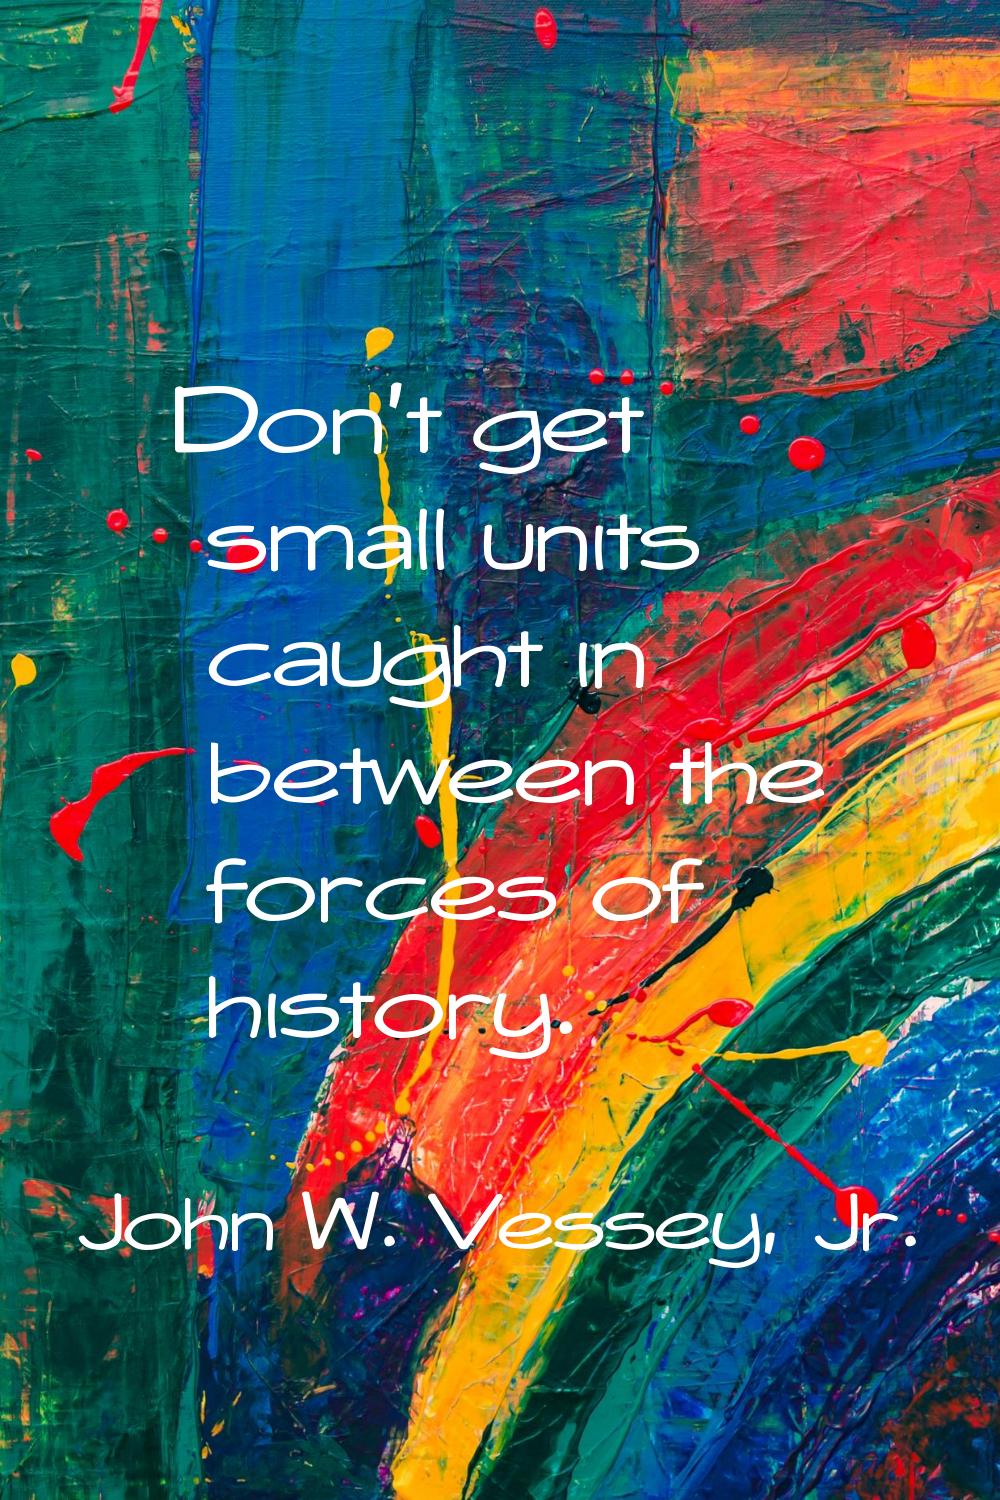 Don't get small units caught in between the forces of history.